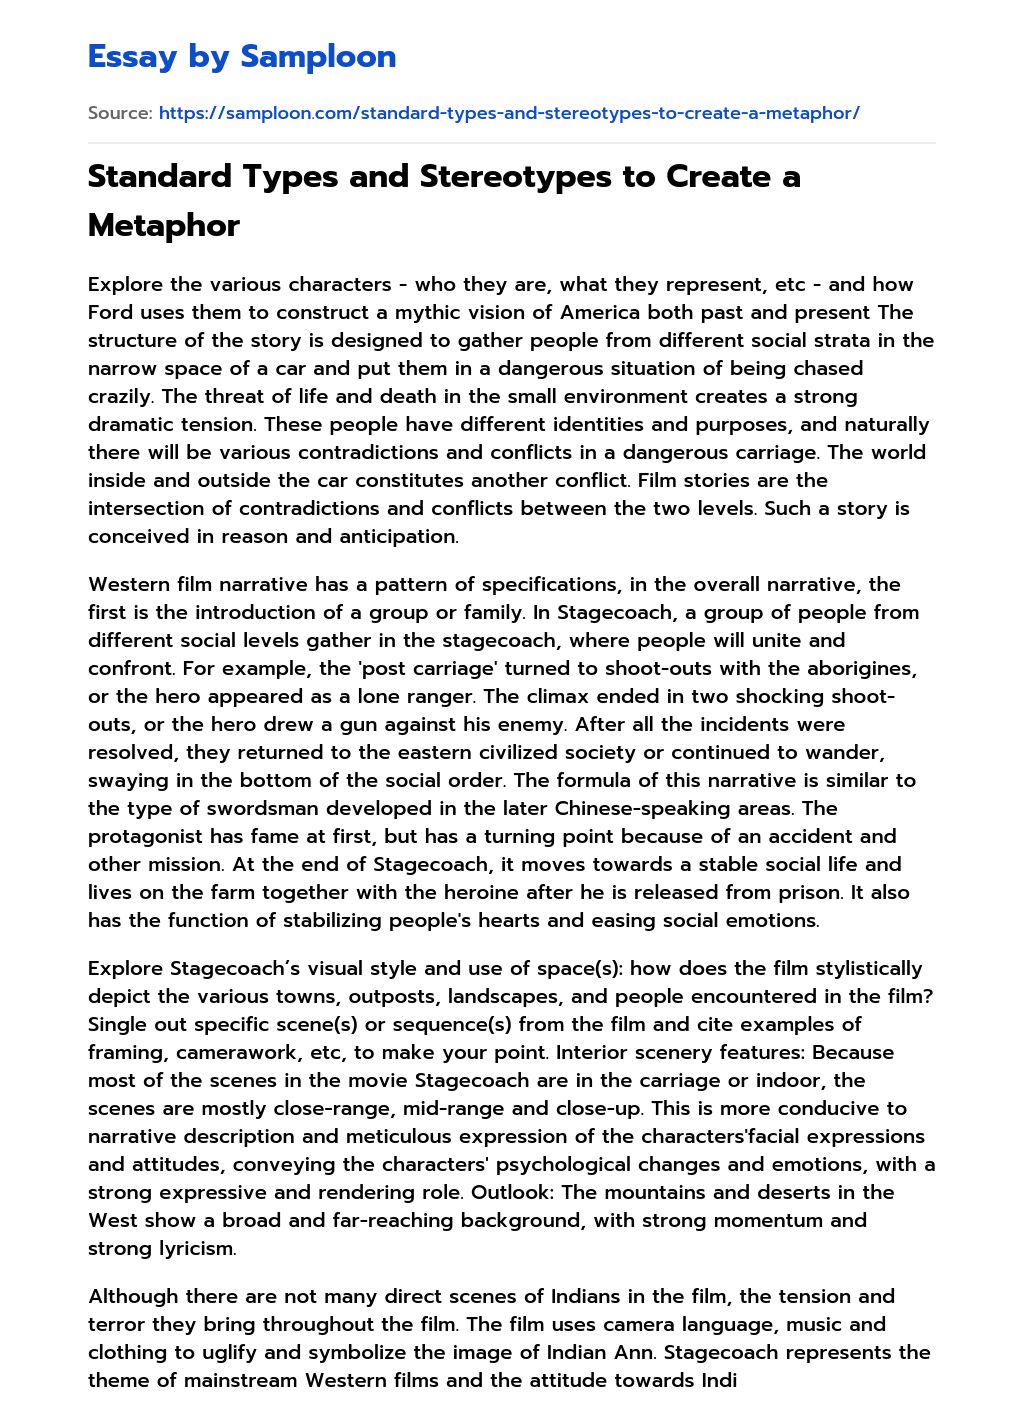 Standard Types and Stereotypes to Create a Metaphor essay